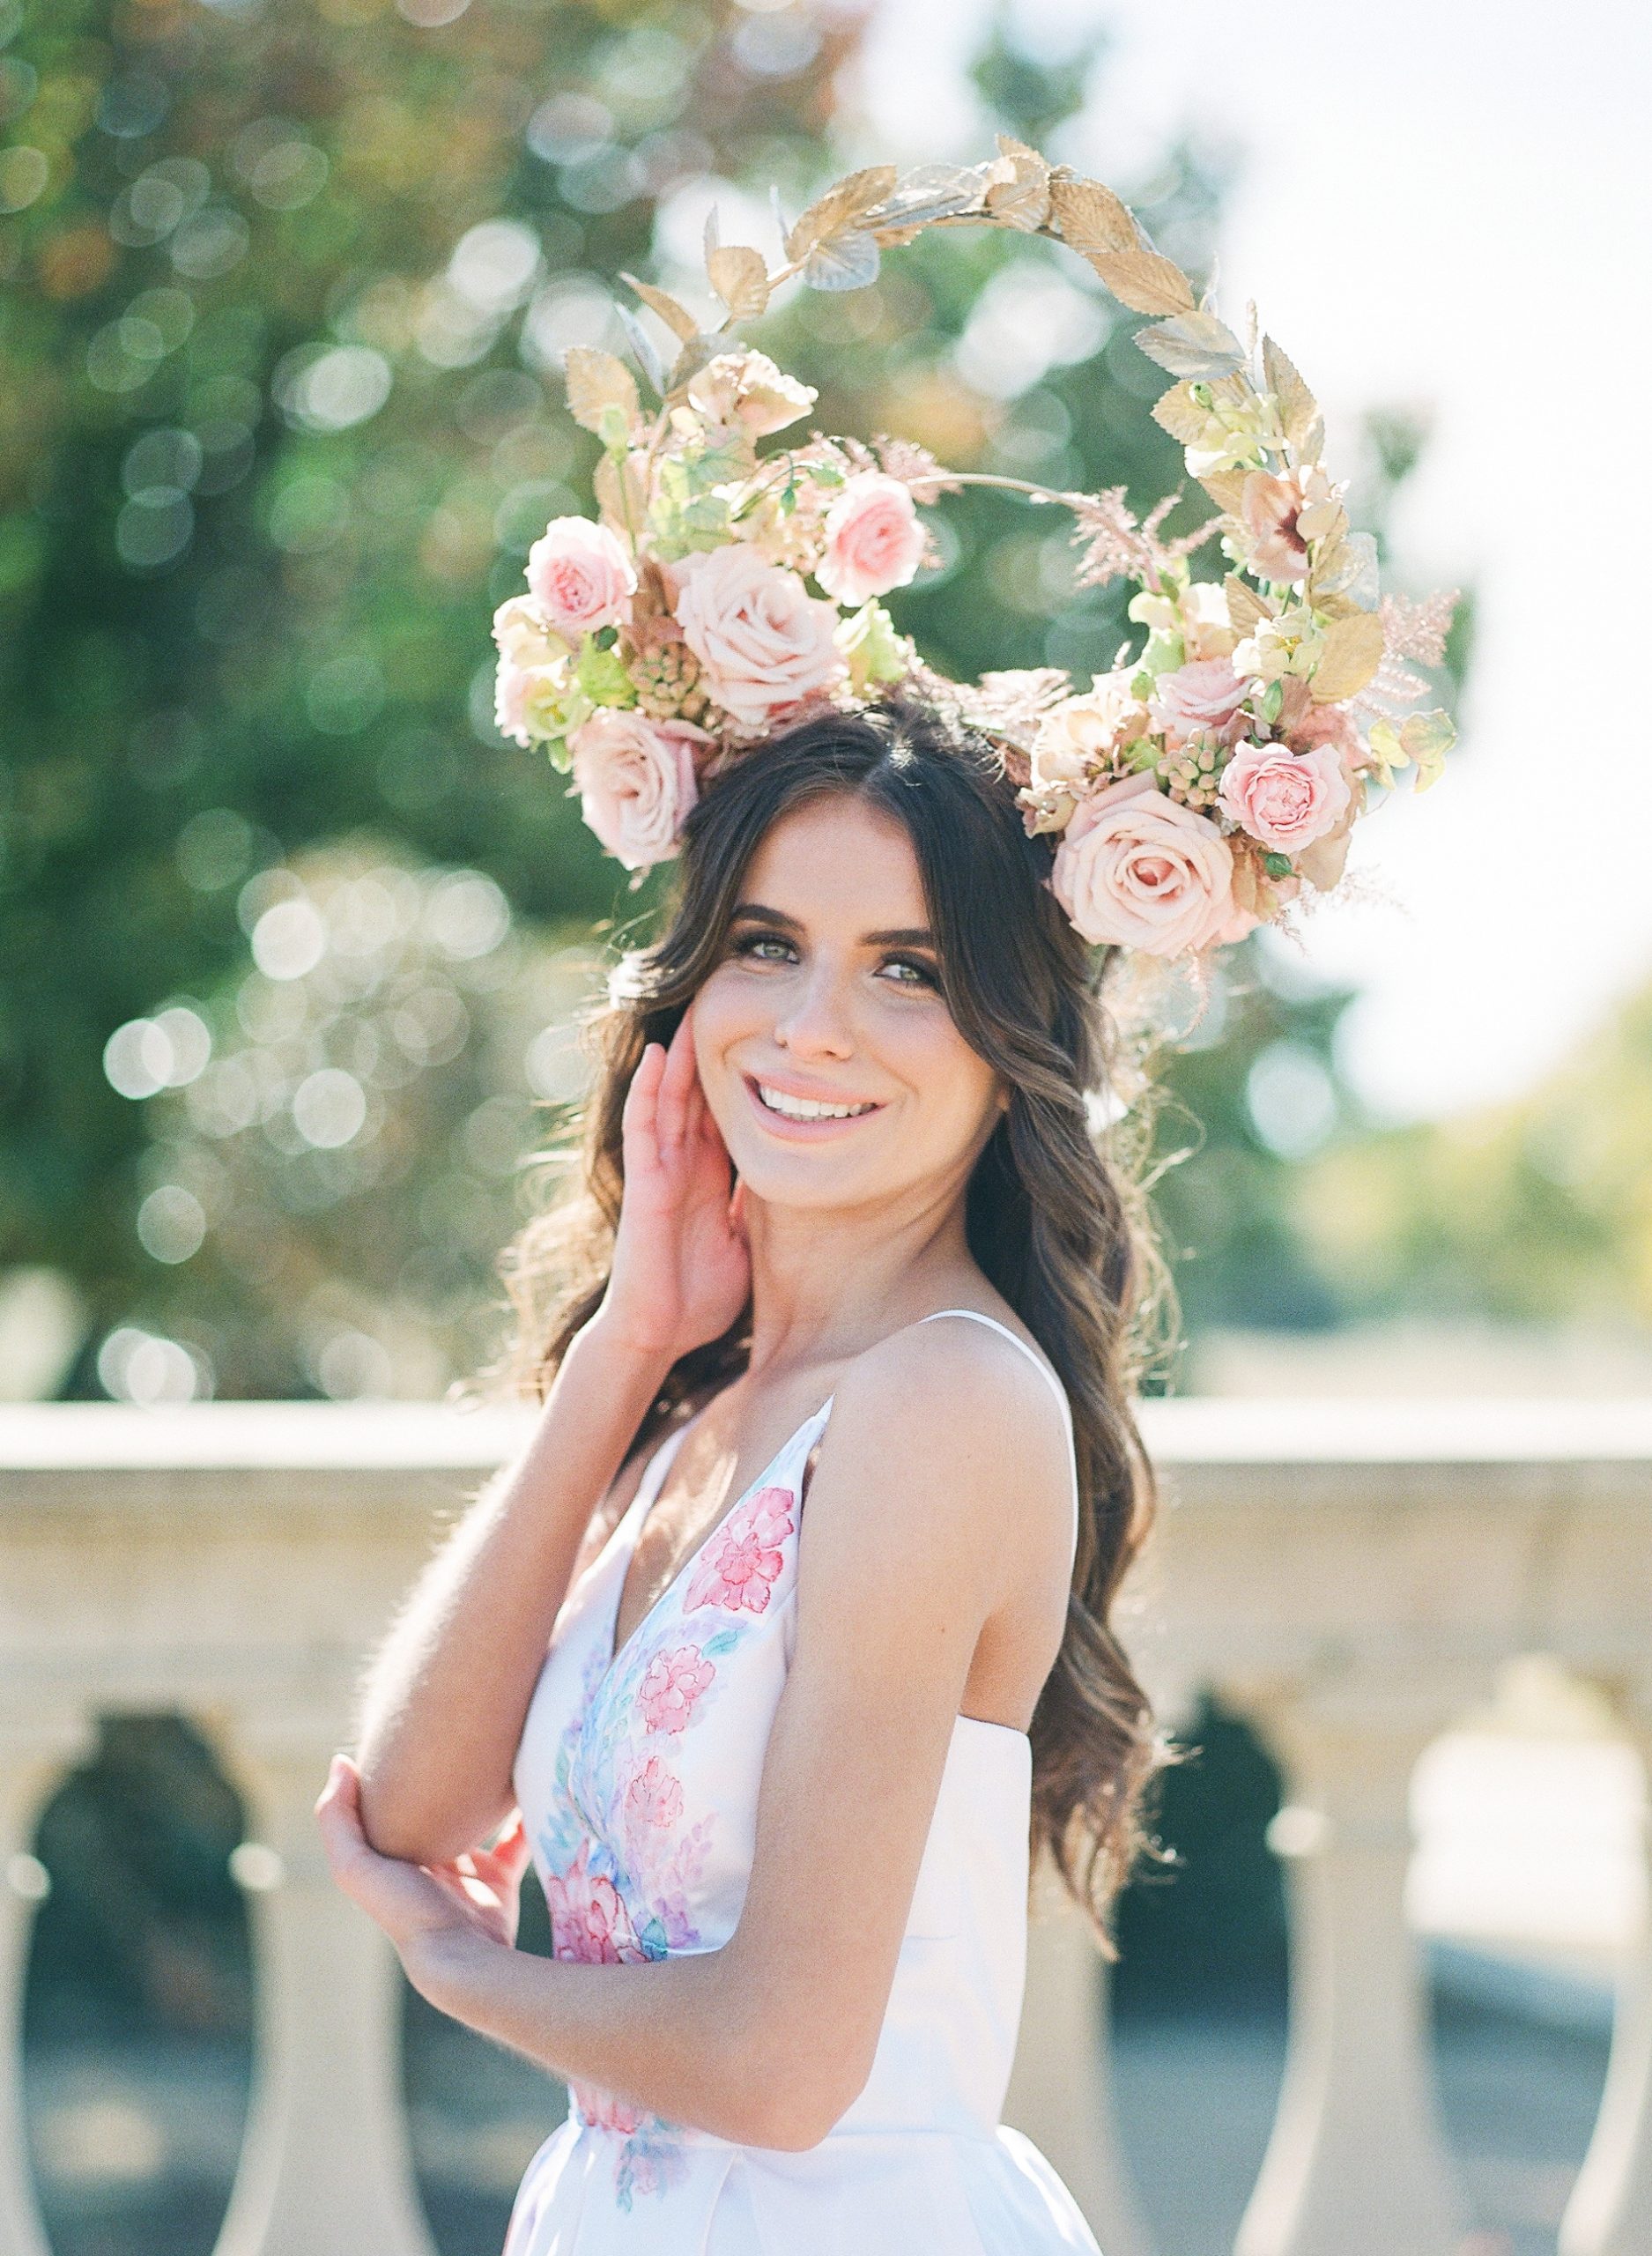 Bride Smiling in Hand Painted Wedding Dress with Floral Headdress Photo